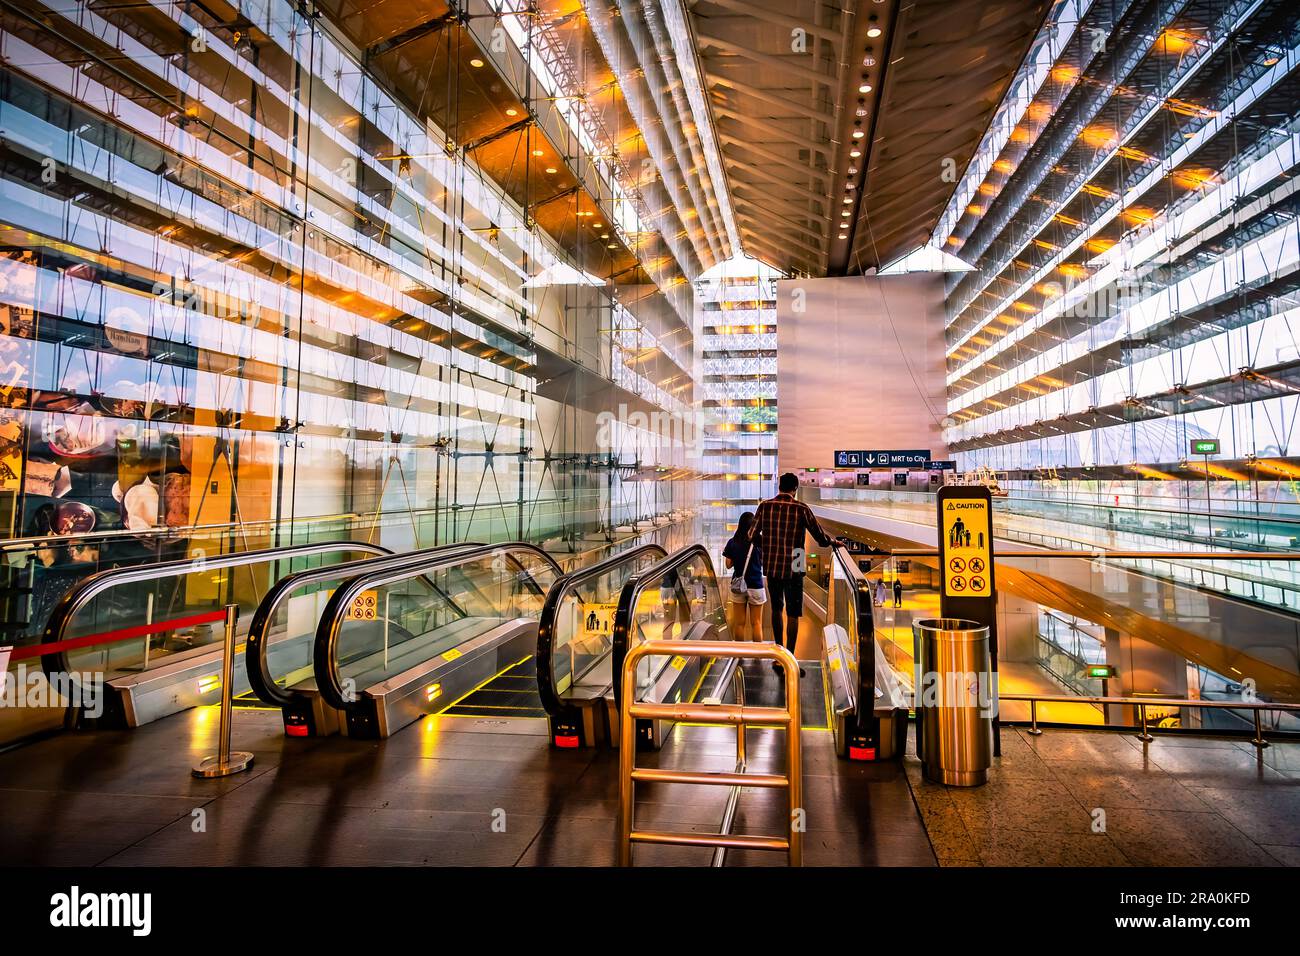 MRT Station at Terminal 3 in Changi Airport, Singapore. Stock Photo